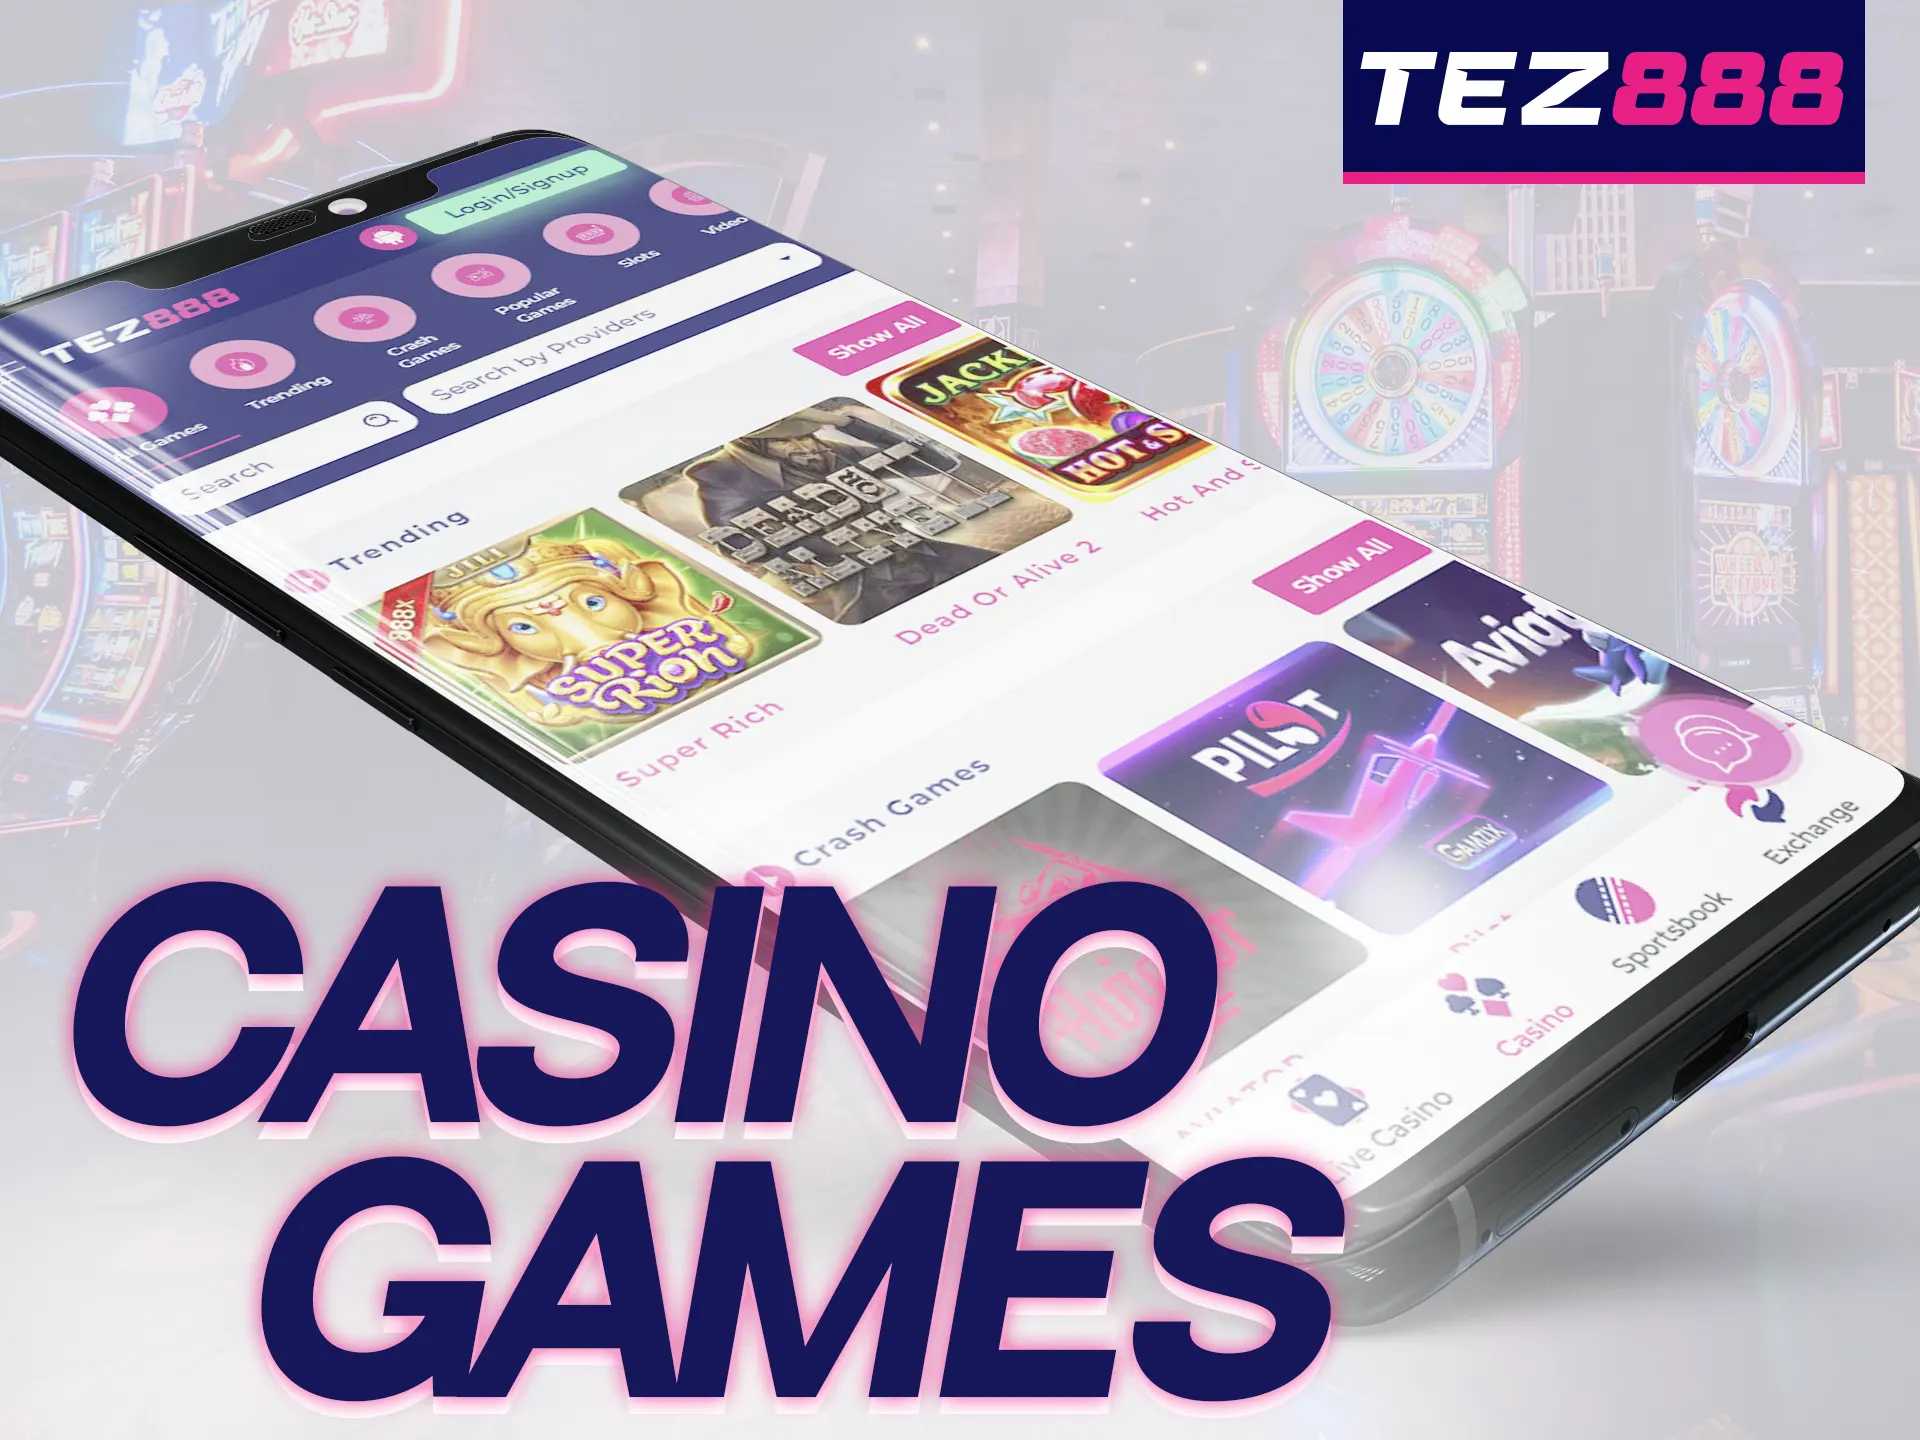 The Tez888 mobile app gives you access to the most popular casino games.